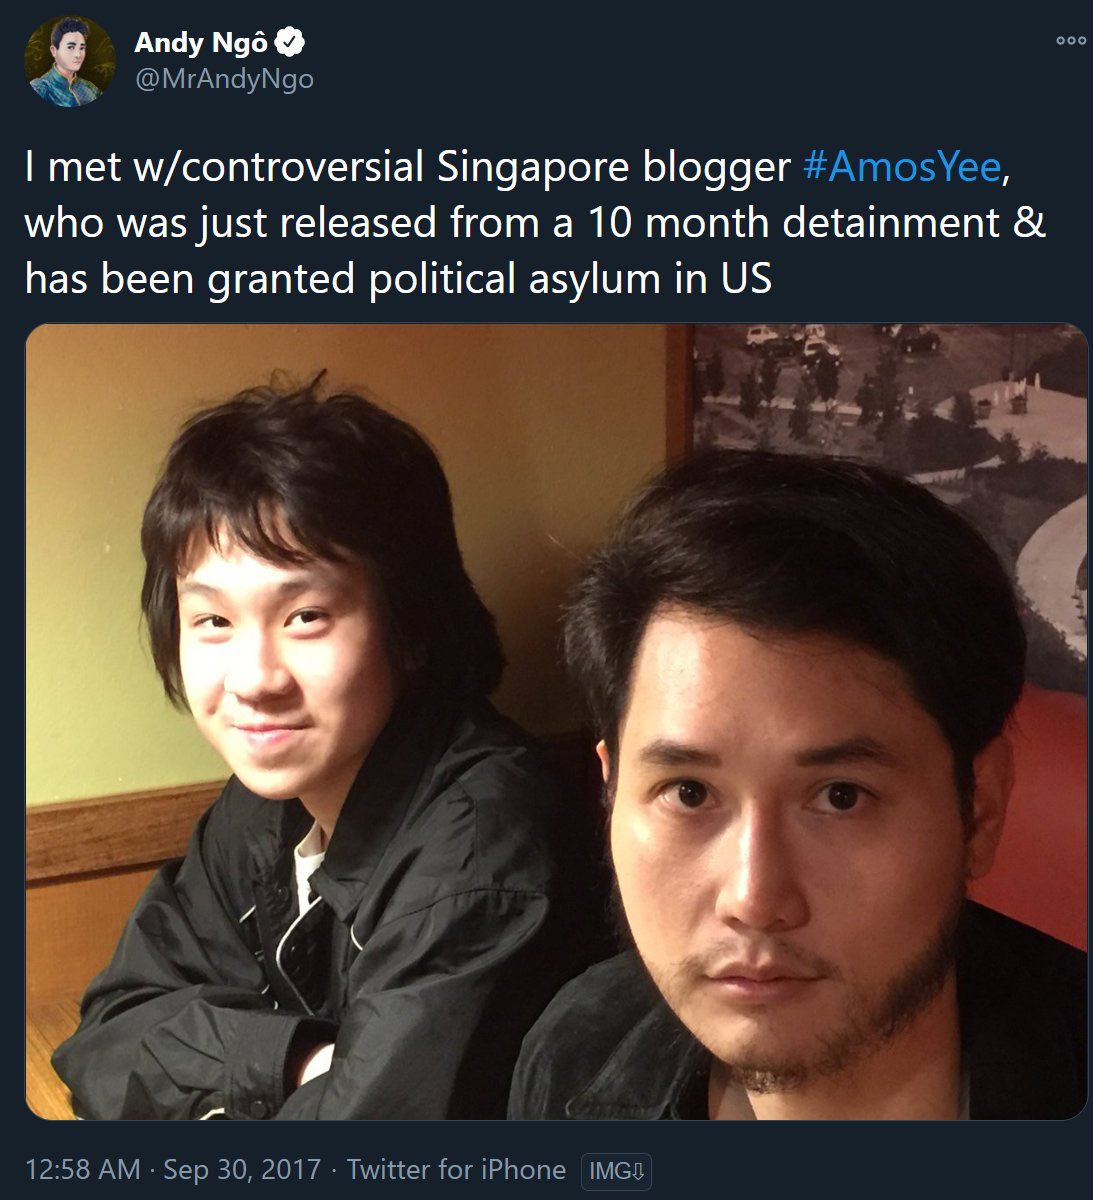 Here we find former journalist @MrAndyNgo hanging out with his “controversial” friend Amos Yee. Days after this photo was taken the openly pro-pedophilia Yee had his YouTube taken down for videos entitled “Why Pedophilia Is Alright,” “Don’t Discriminate Pedophiles,” and “Free…